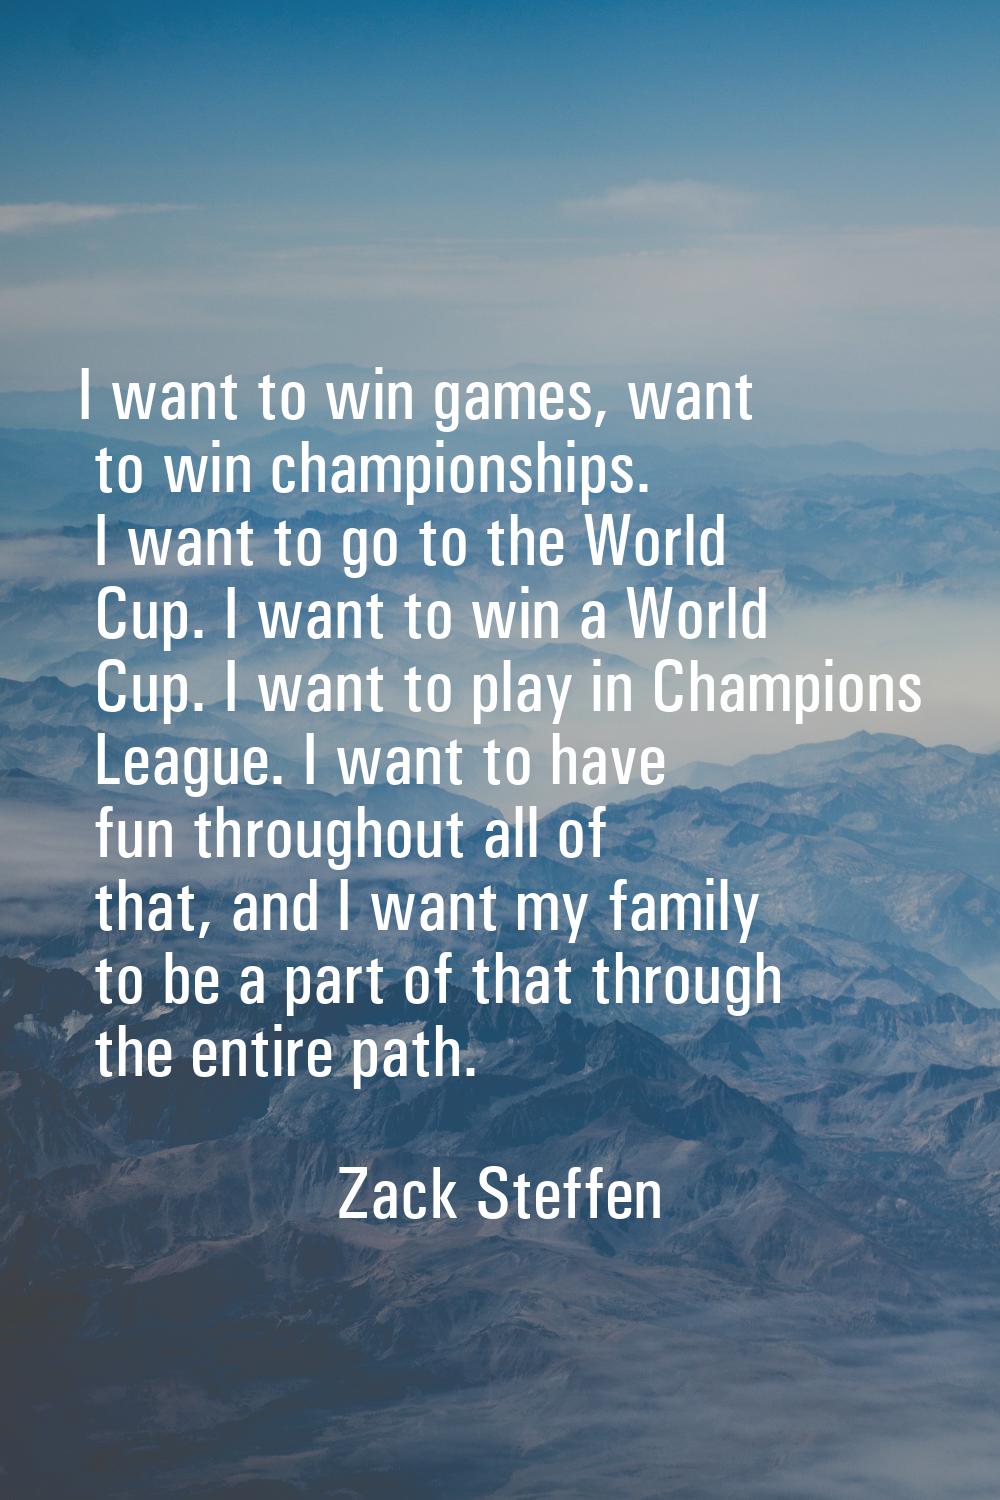 I want to win games, want to win championships. I want to go to the World Cup. I want to win a Worl